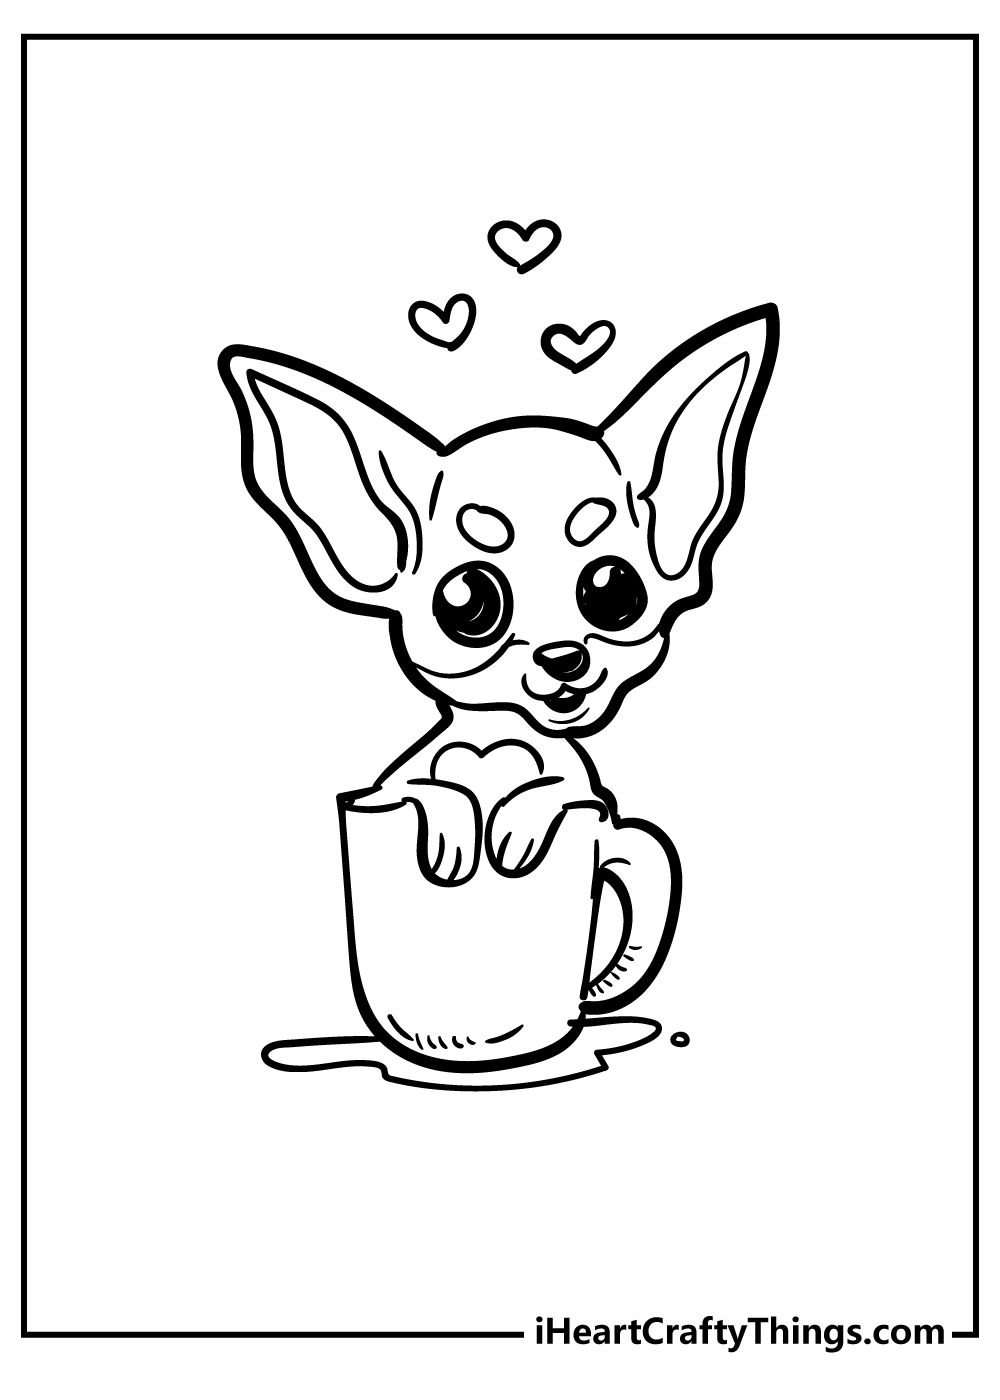 Chihuahua Coloring Pages for adults free printable